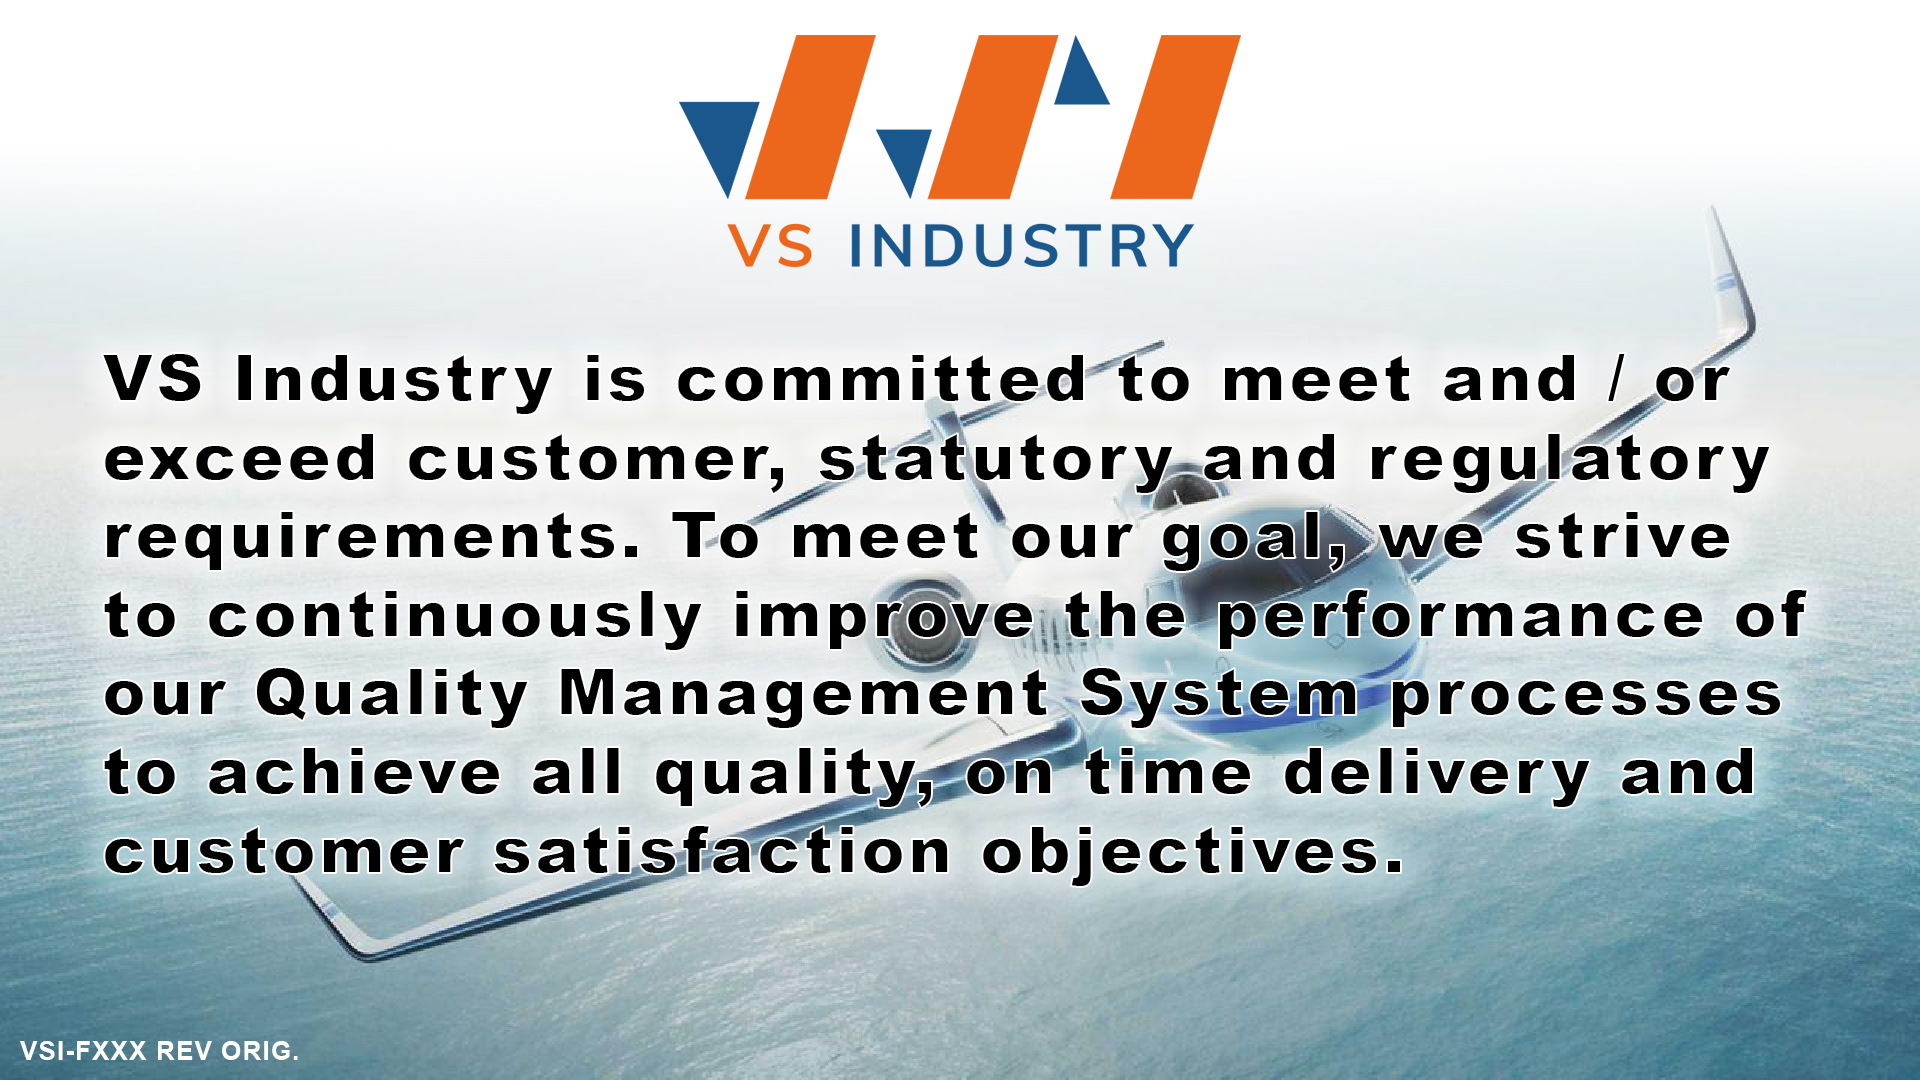 VS Industry is committed to meet and / or exceed customer, statutory and regulatory requirements. To meet our goal, we strive to continuously improve the performance of our Quality Management System processes to achieve all quality, on time delivery and customer satisfaction objectives.